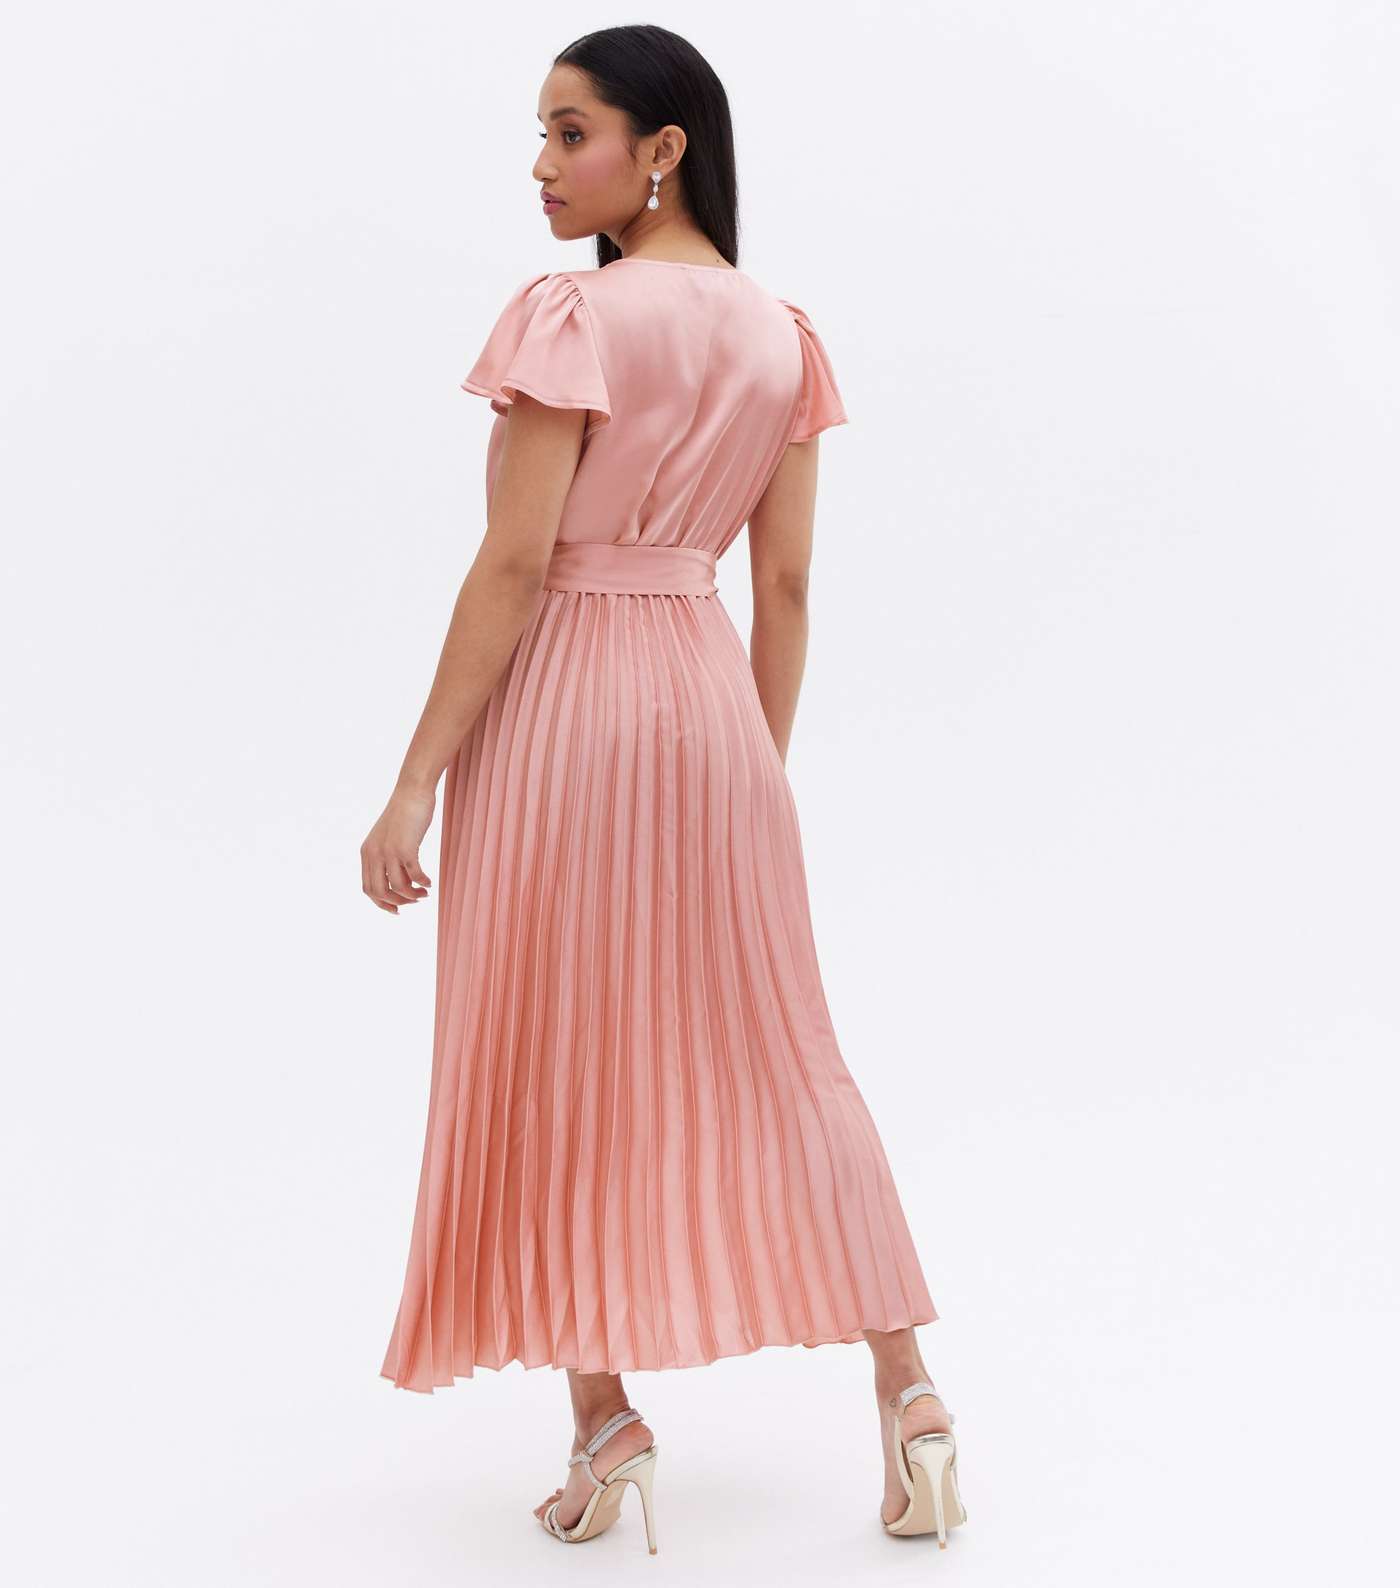 Petite Pale Pink Satin Pleated Belted Midi Wrap Dress Image 4